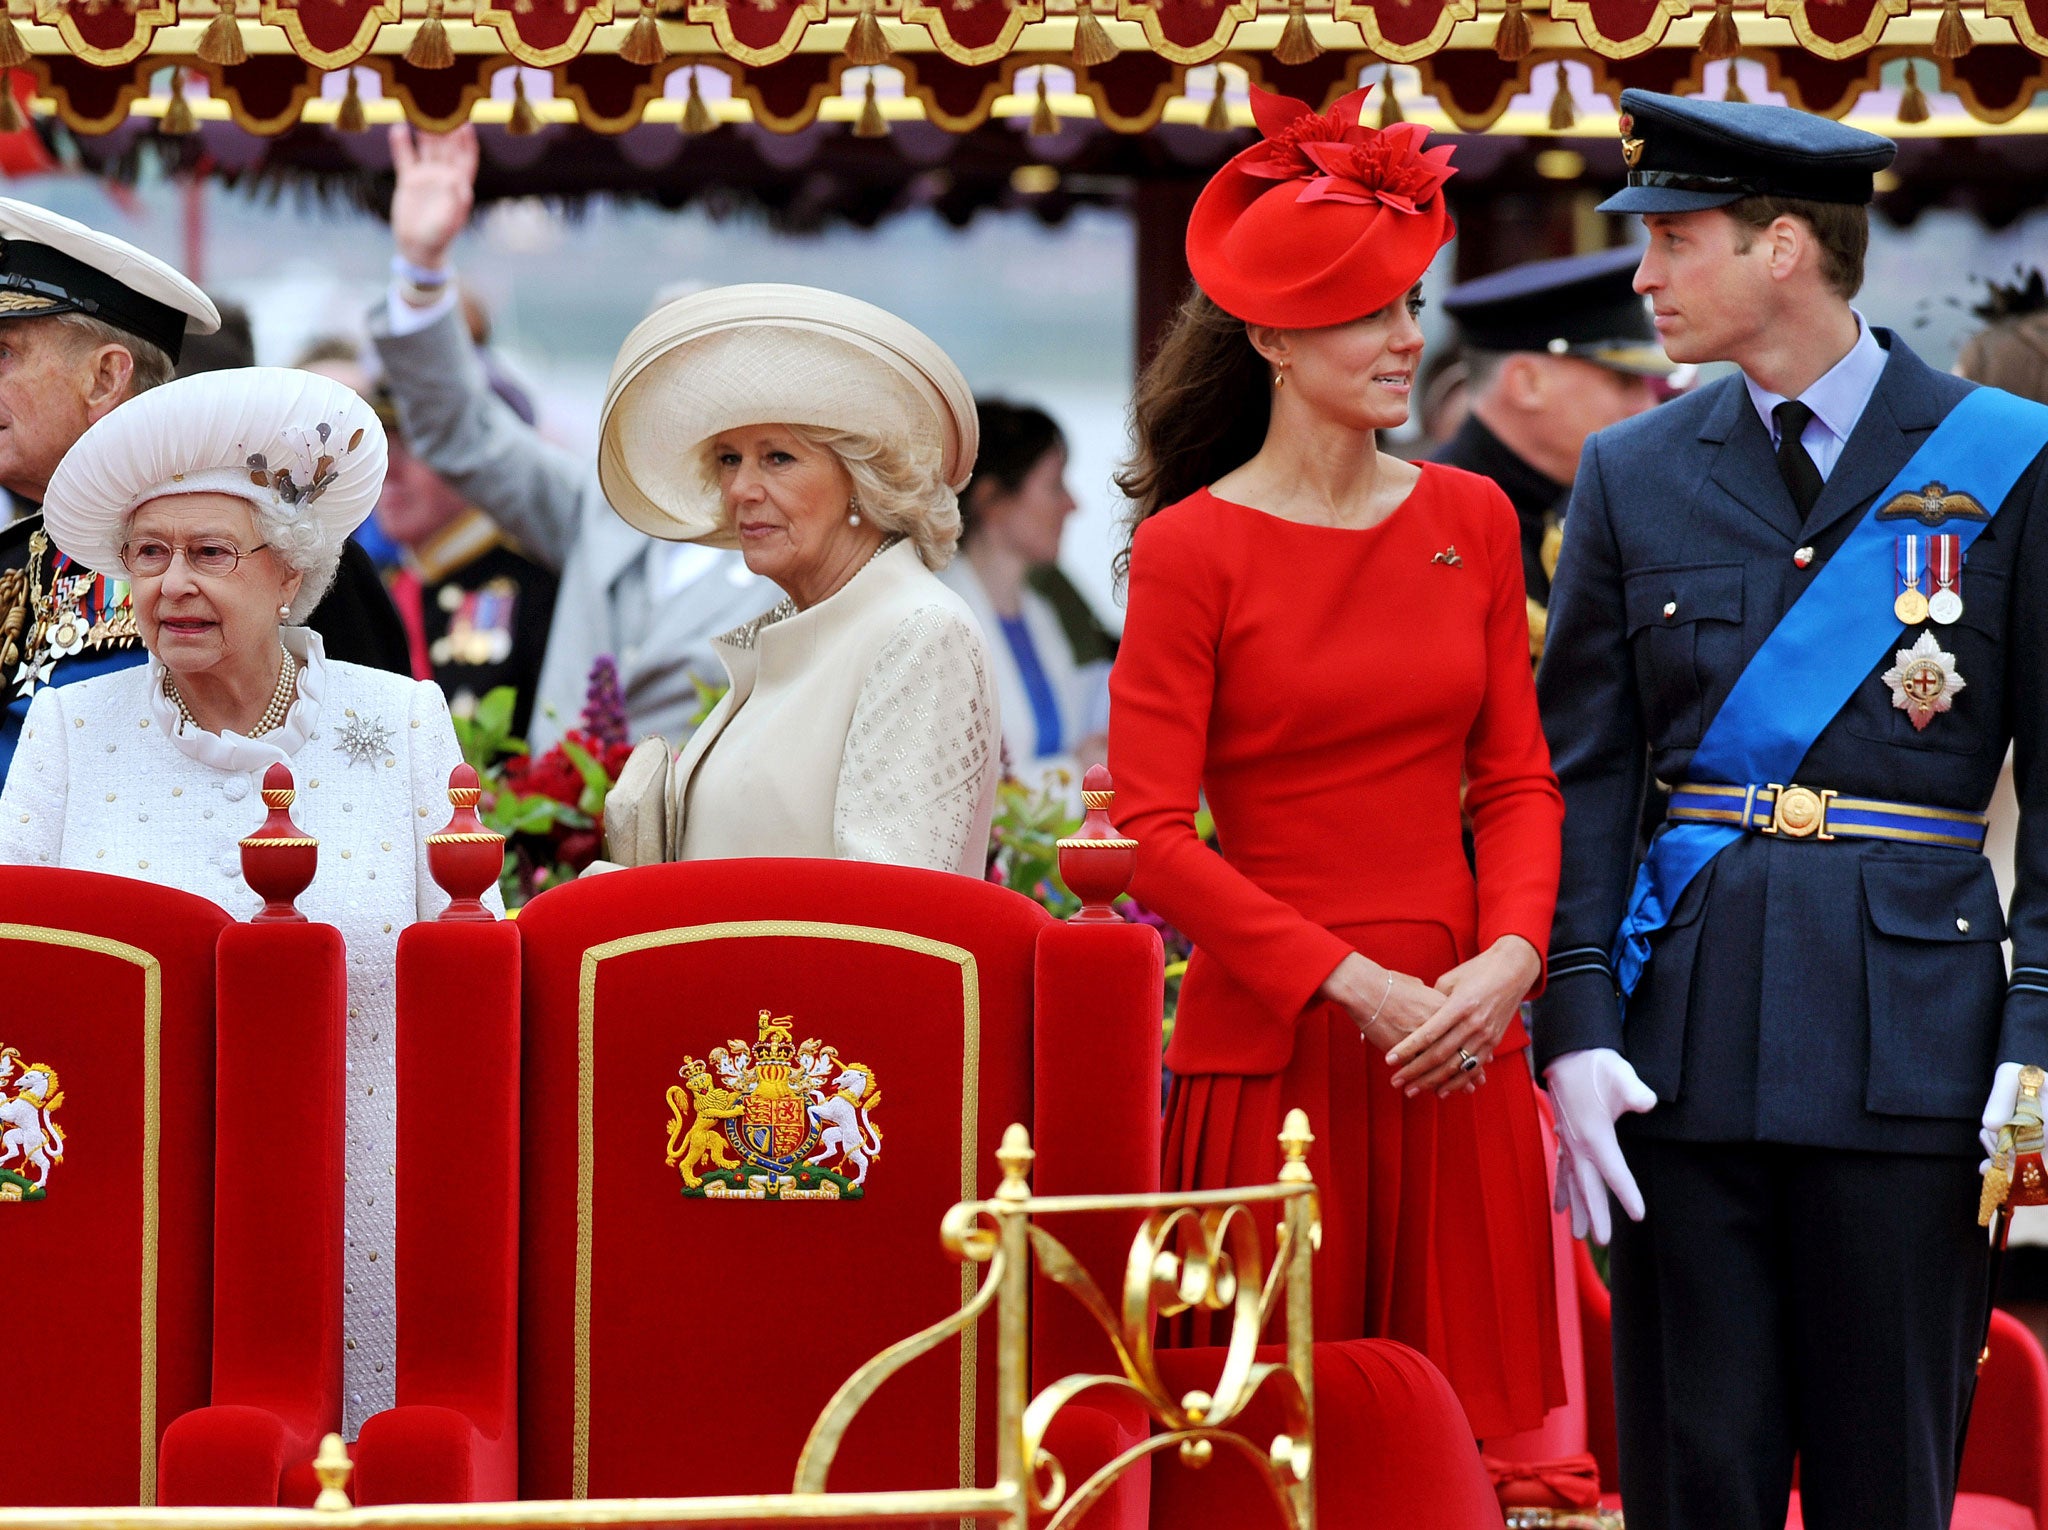 Prince Philip, The Duke of Edinburgh, Queen Elizabeth II, Camilla, Duchess of Cornwall, Catherine, Duchess of Cambridge and Prince William, Duke of Cambridge onboard the Spirit of Chartwell during the Diamond Jubilee Pageant on the River Thames during the Diamond Jubilee Thames River Pageant on June 3, 2012 in London, England.